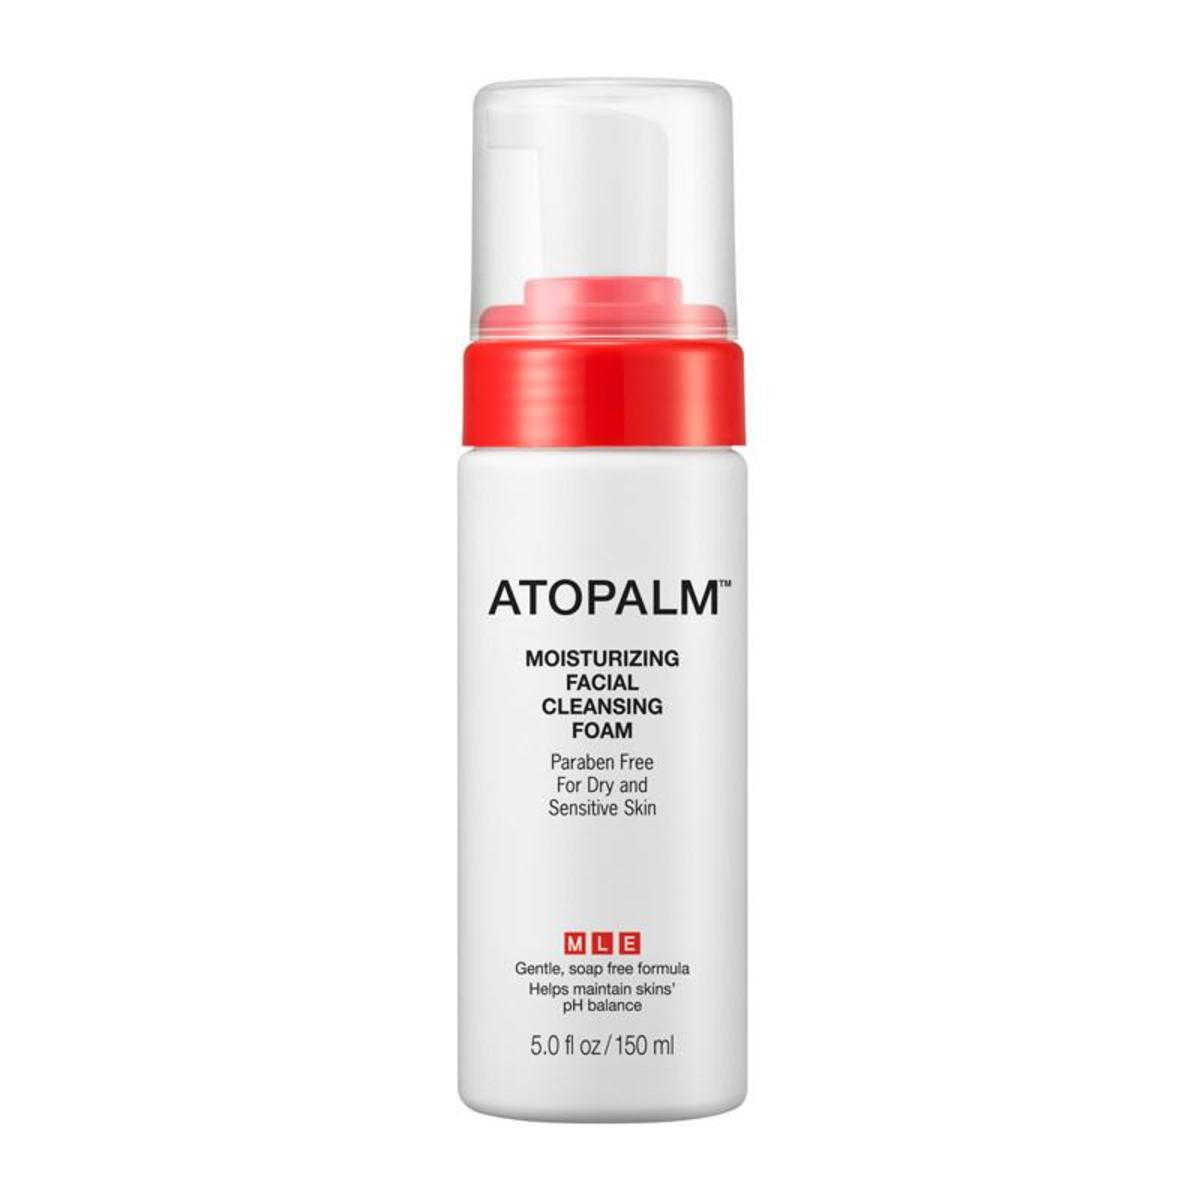 Atopalm Moisturizing Facial Cleansing Foam, $23, available at Peach & Lily.